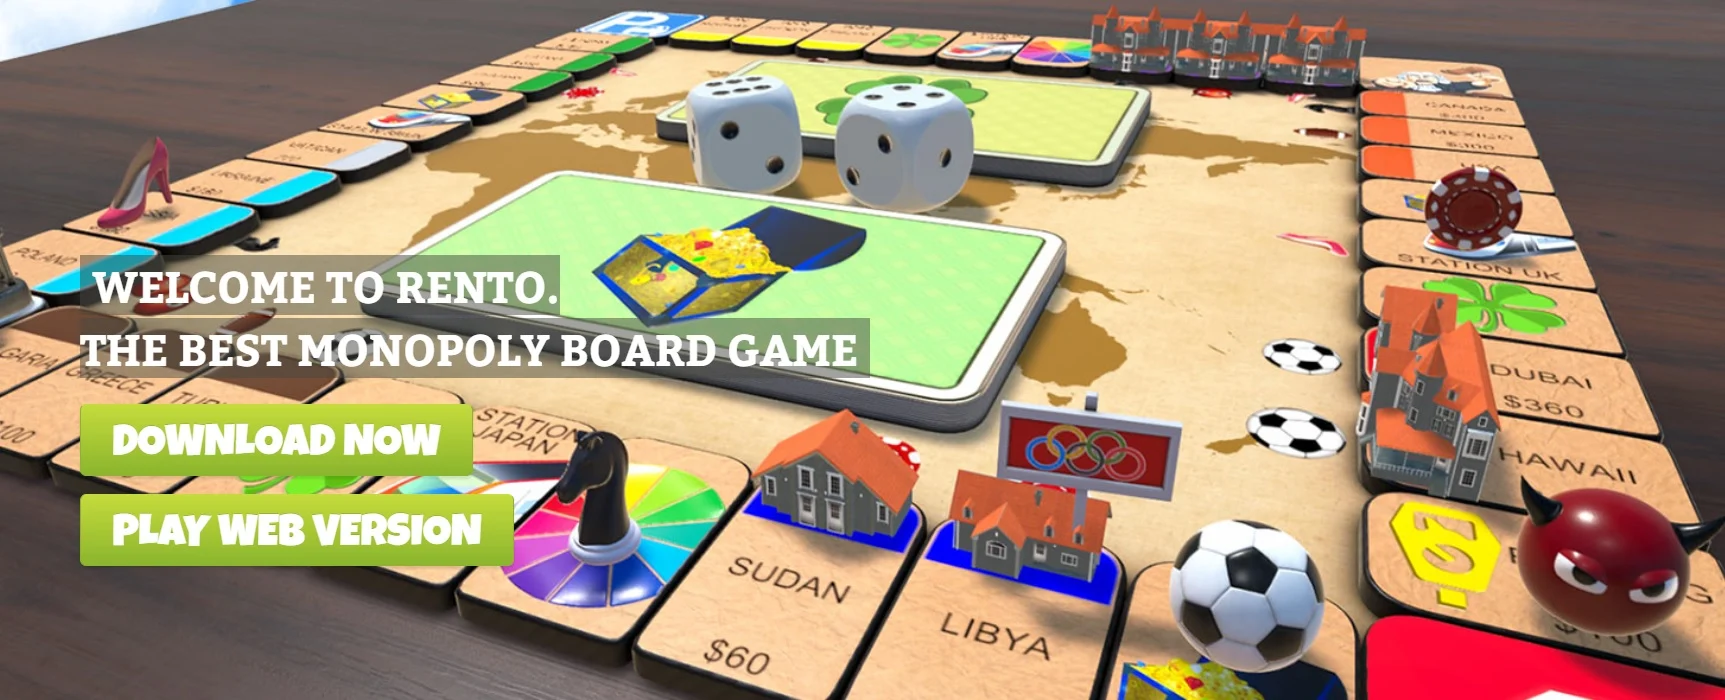 tan colored monopoly-looking board with various countries and money amounts on each space